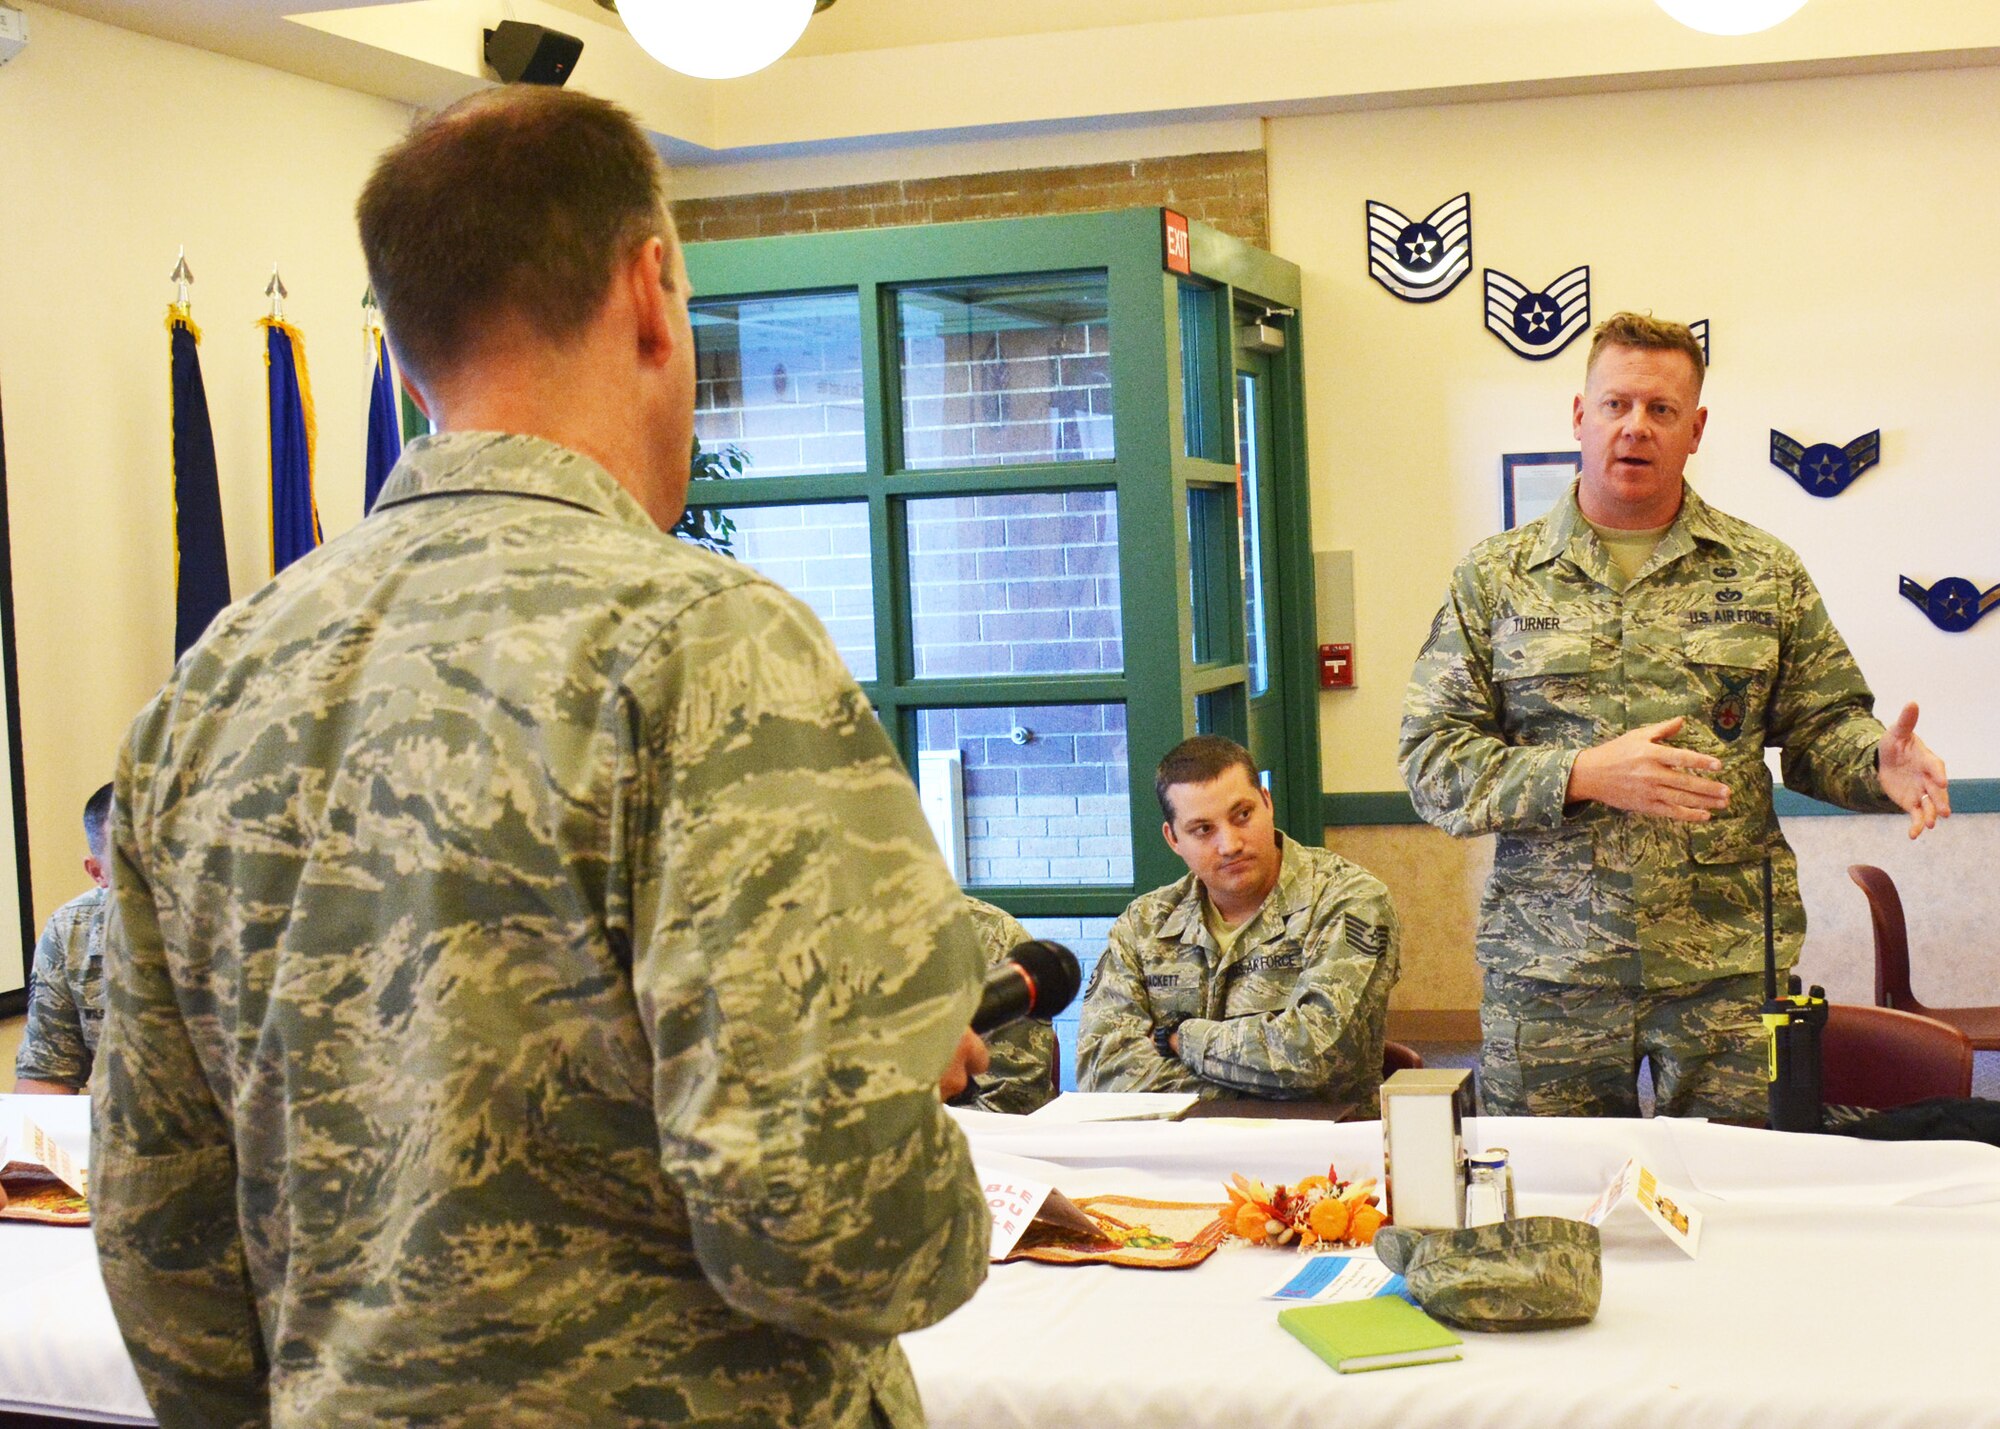 120th Airlift Commander Col. Lee Smith takes a question on awards and decorations from Tech. Sgt. Lance Turner during his lunch and learn event for Airmen held in the 120th AW Dining Facility on the base in Great Falls, Mont. November 6, 2016. (U.S. Air National Guard photo by Senior Master Sgt. Eric Peterson)